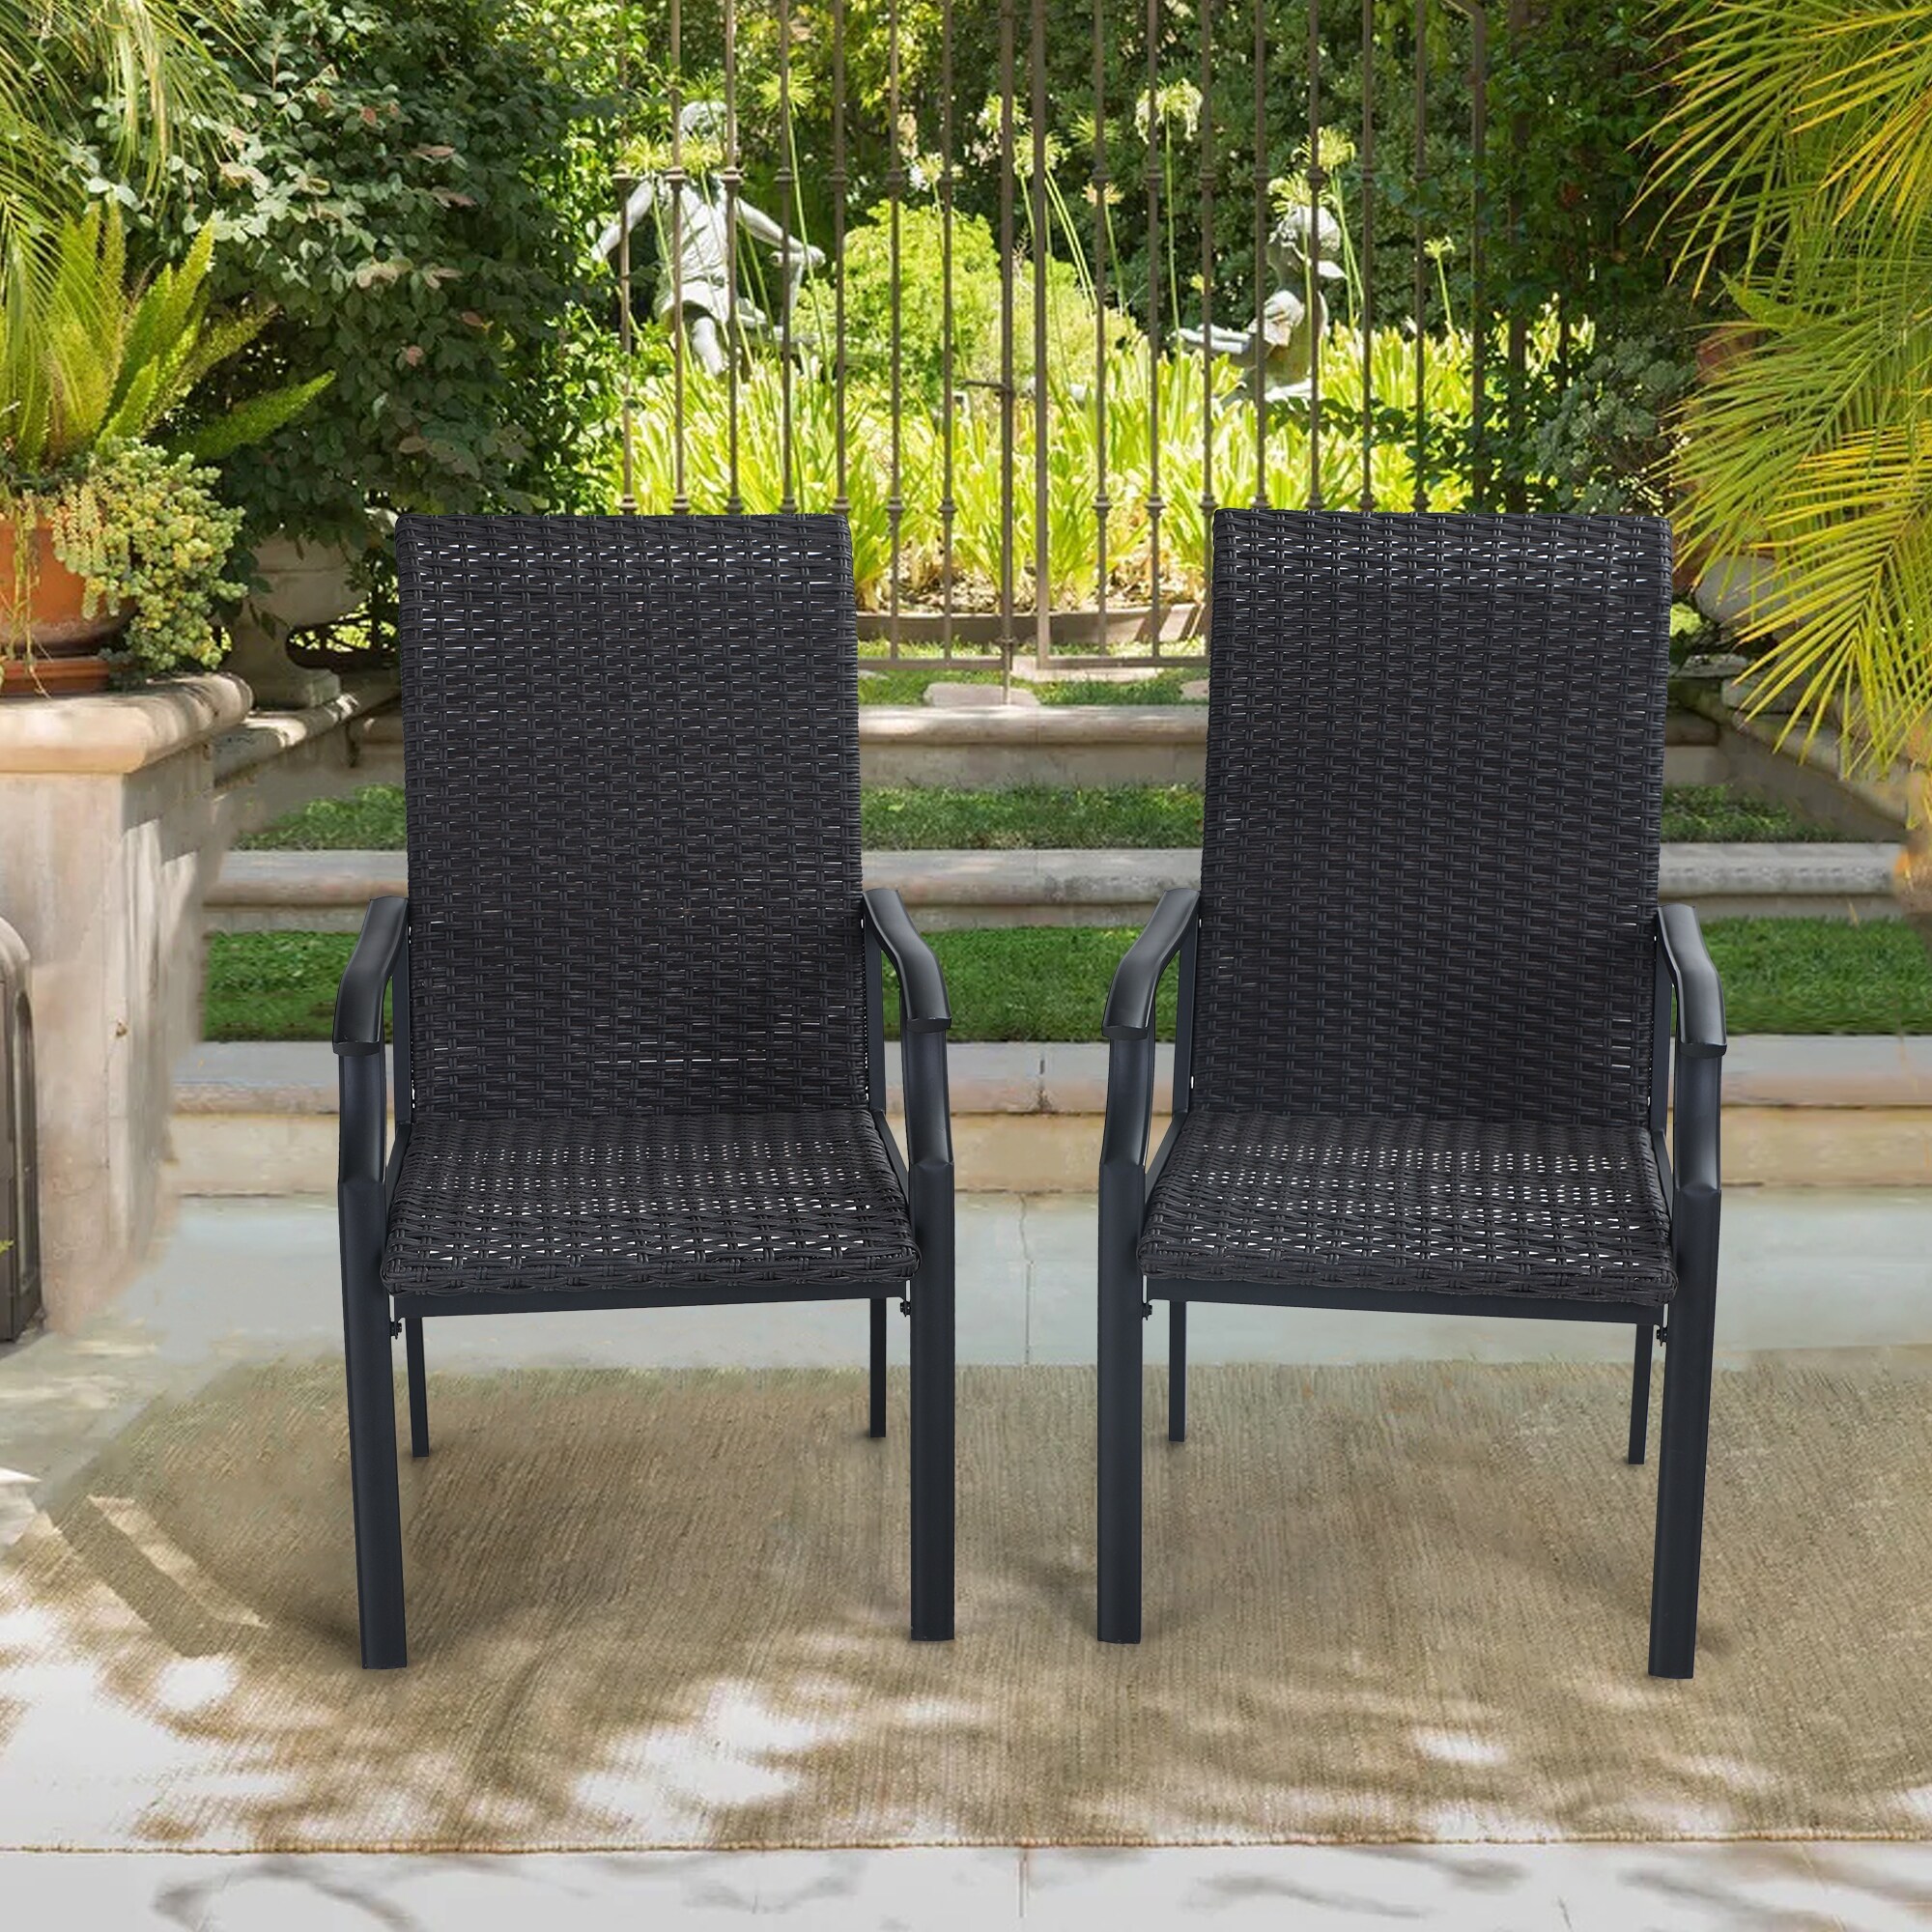 Details about   Metal Patio Chair Set of 2 Stackable Bistro Deck Dining Chairs Outdoor Furniture 